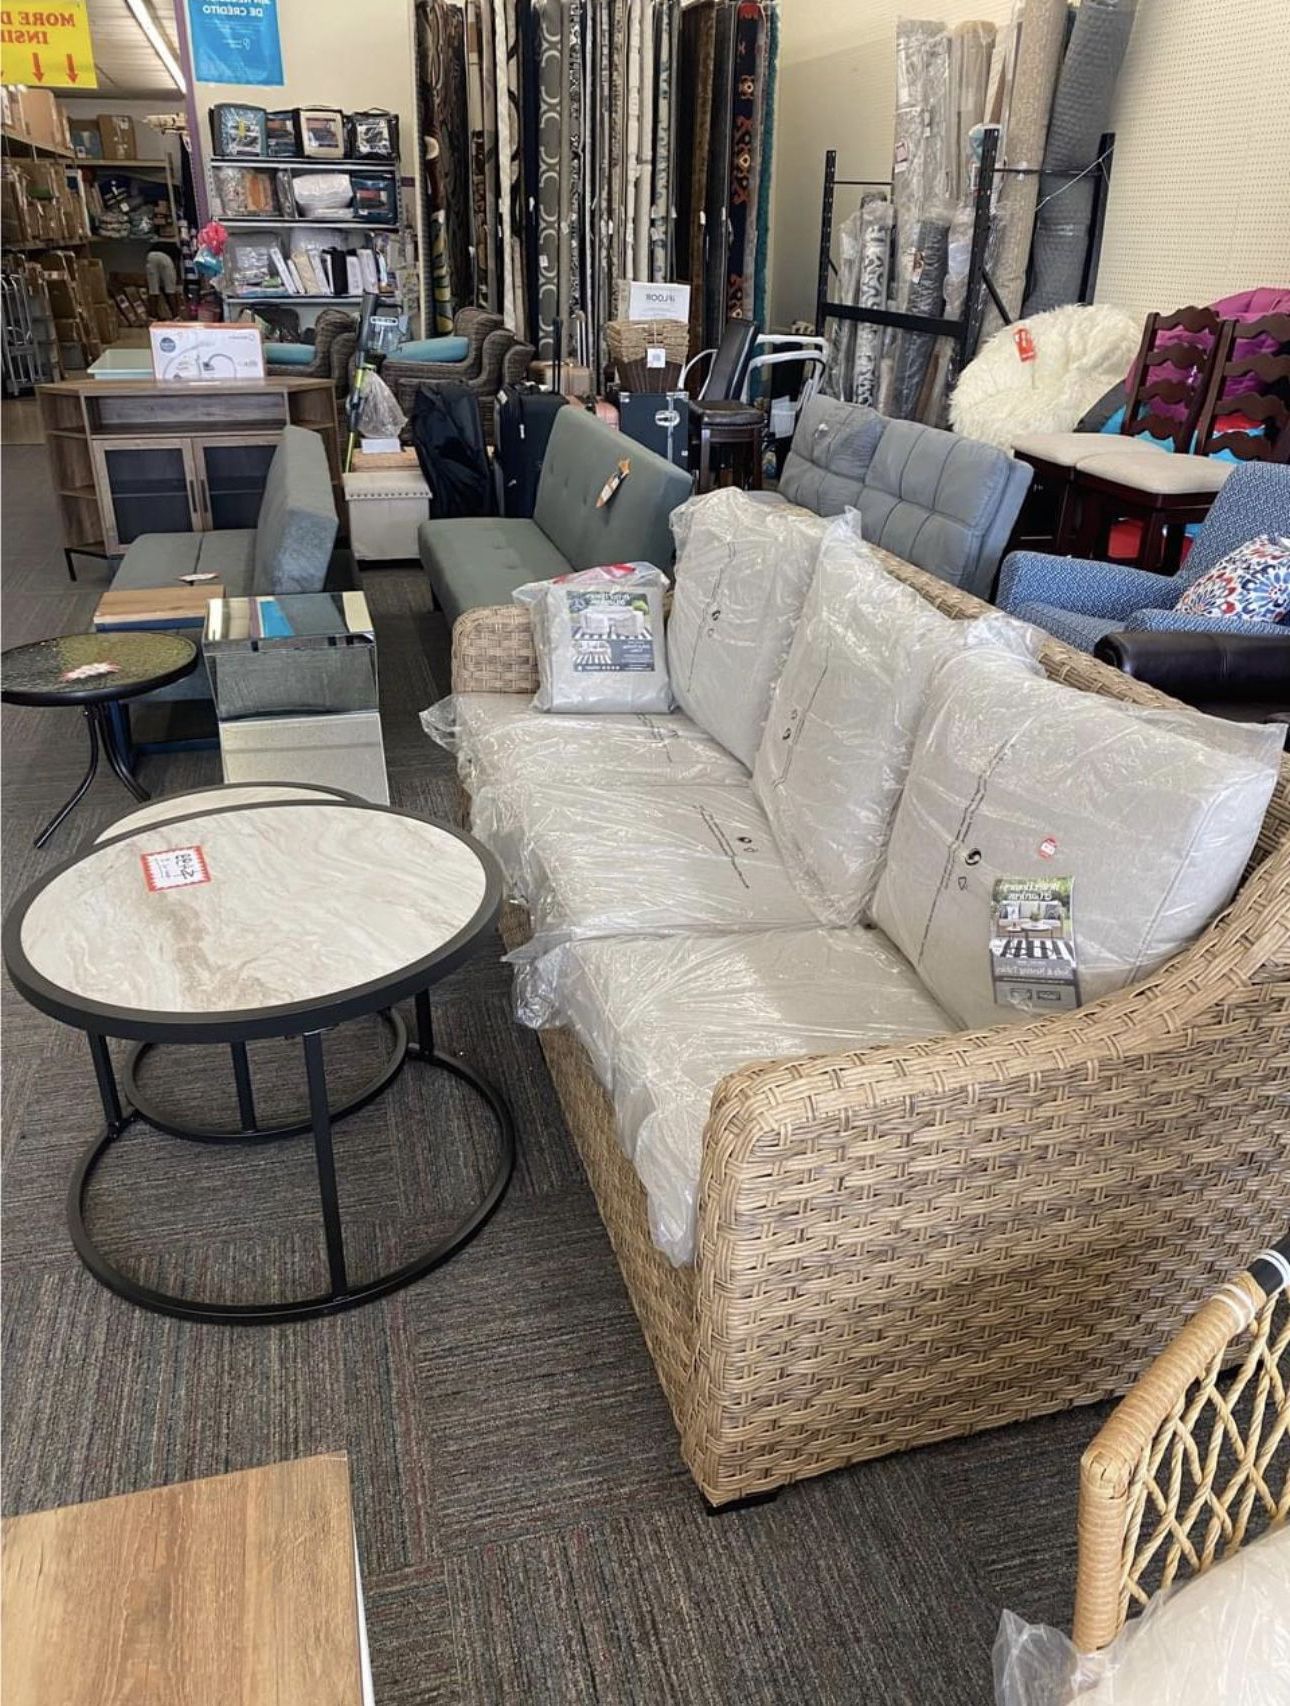 3 Piece Sofa & Nesting Table Set Intended For Latest Better Homes & Gardens 3 Piece Sofa & Nesting Table Set With Patio Cover  For Sale In Norfolk, Va – Offerup (Photo 8 of 15)